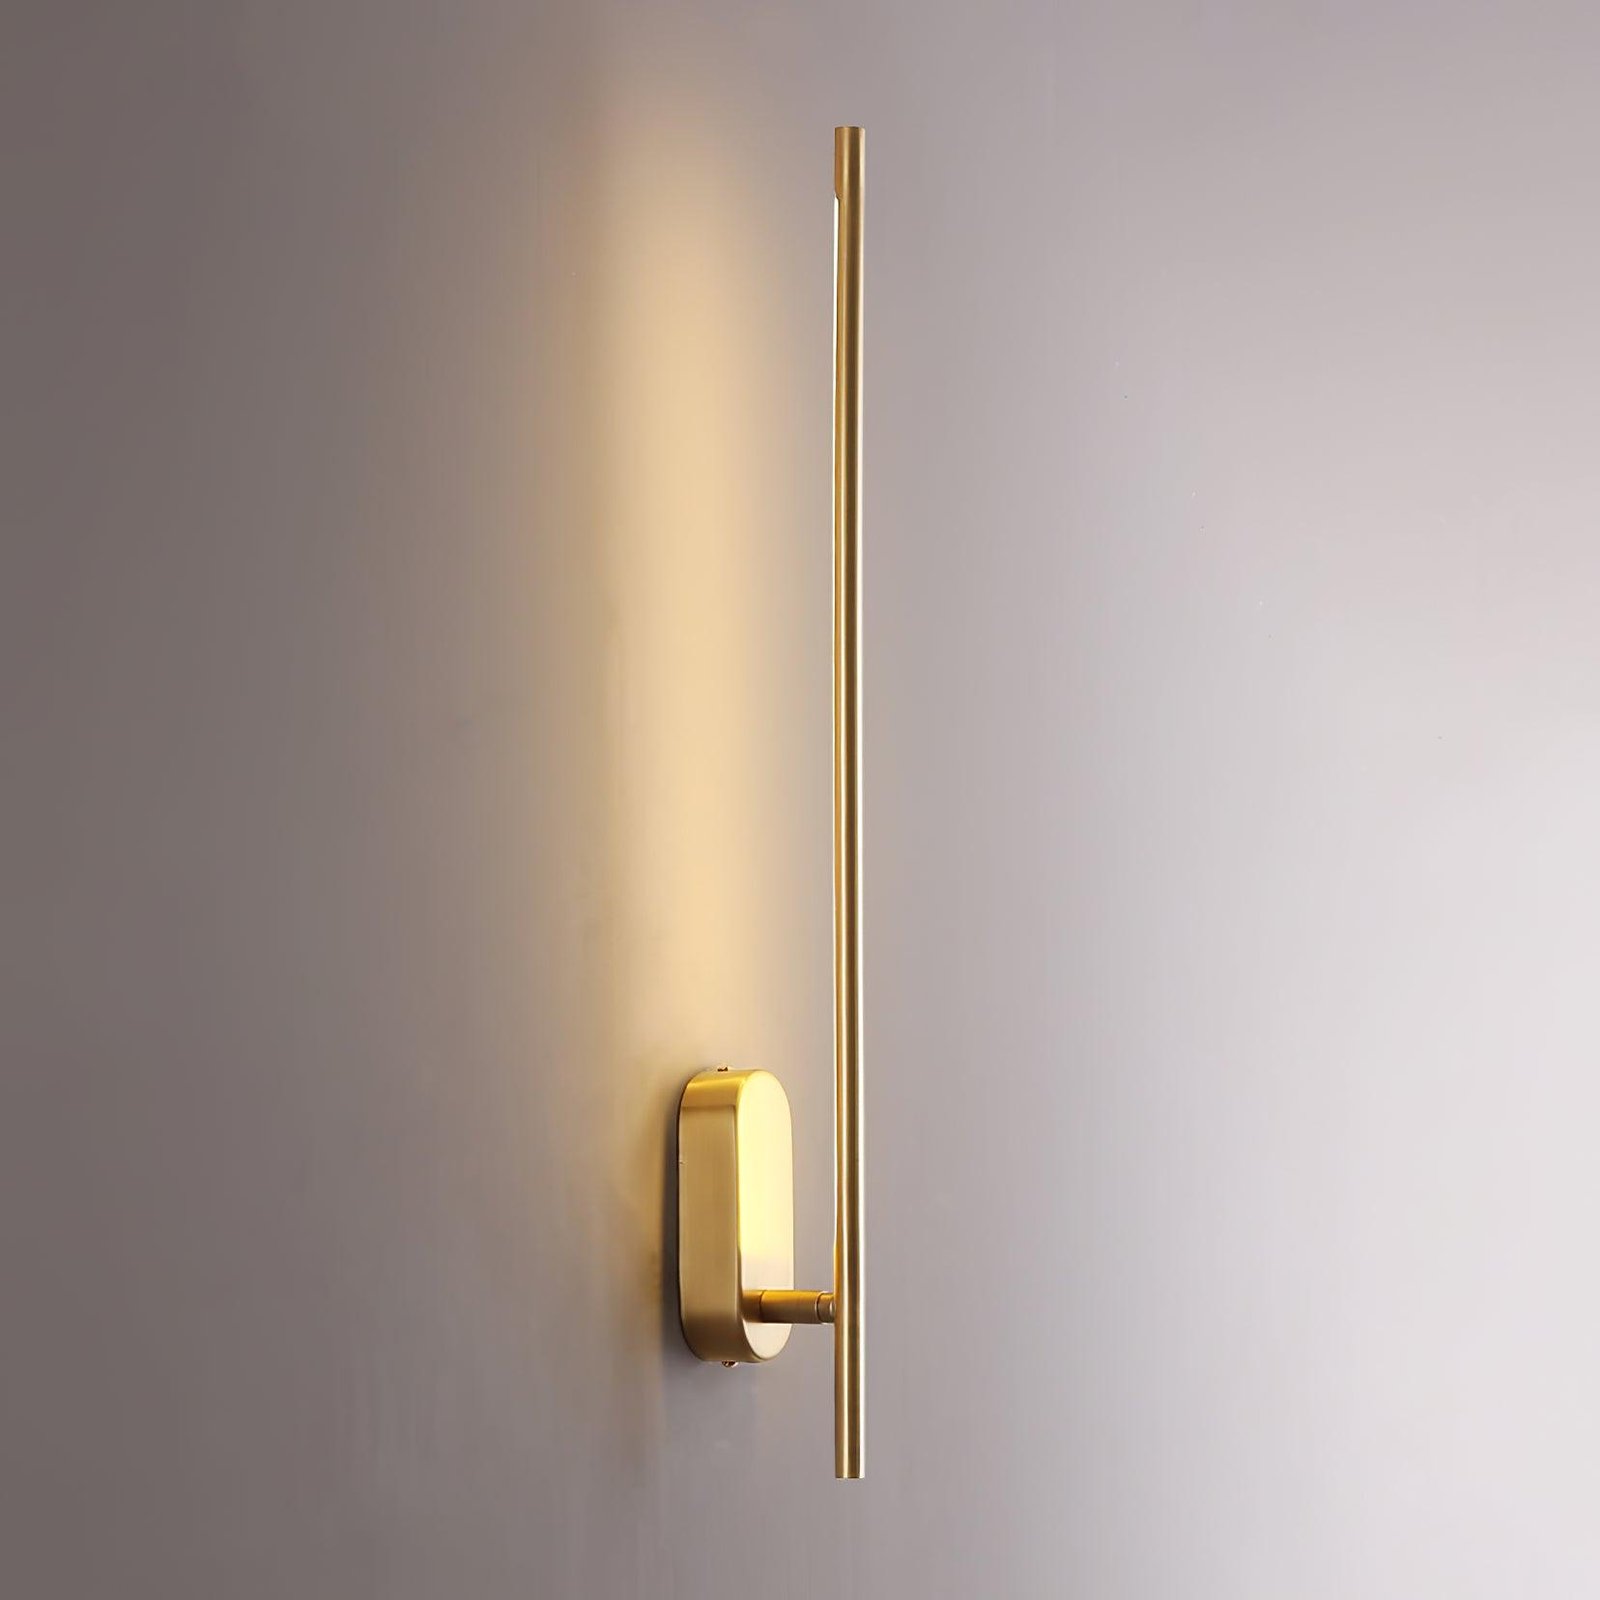 Set of 2 Brass Stick Shaped Metal Sconces, Dimensions: Length 2 inches x Width 3.1 inches x Height 23.6 inches, in Cool White